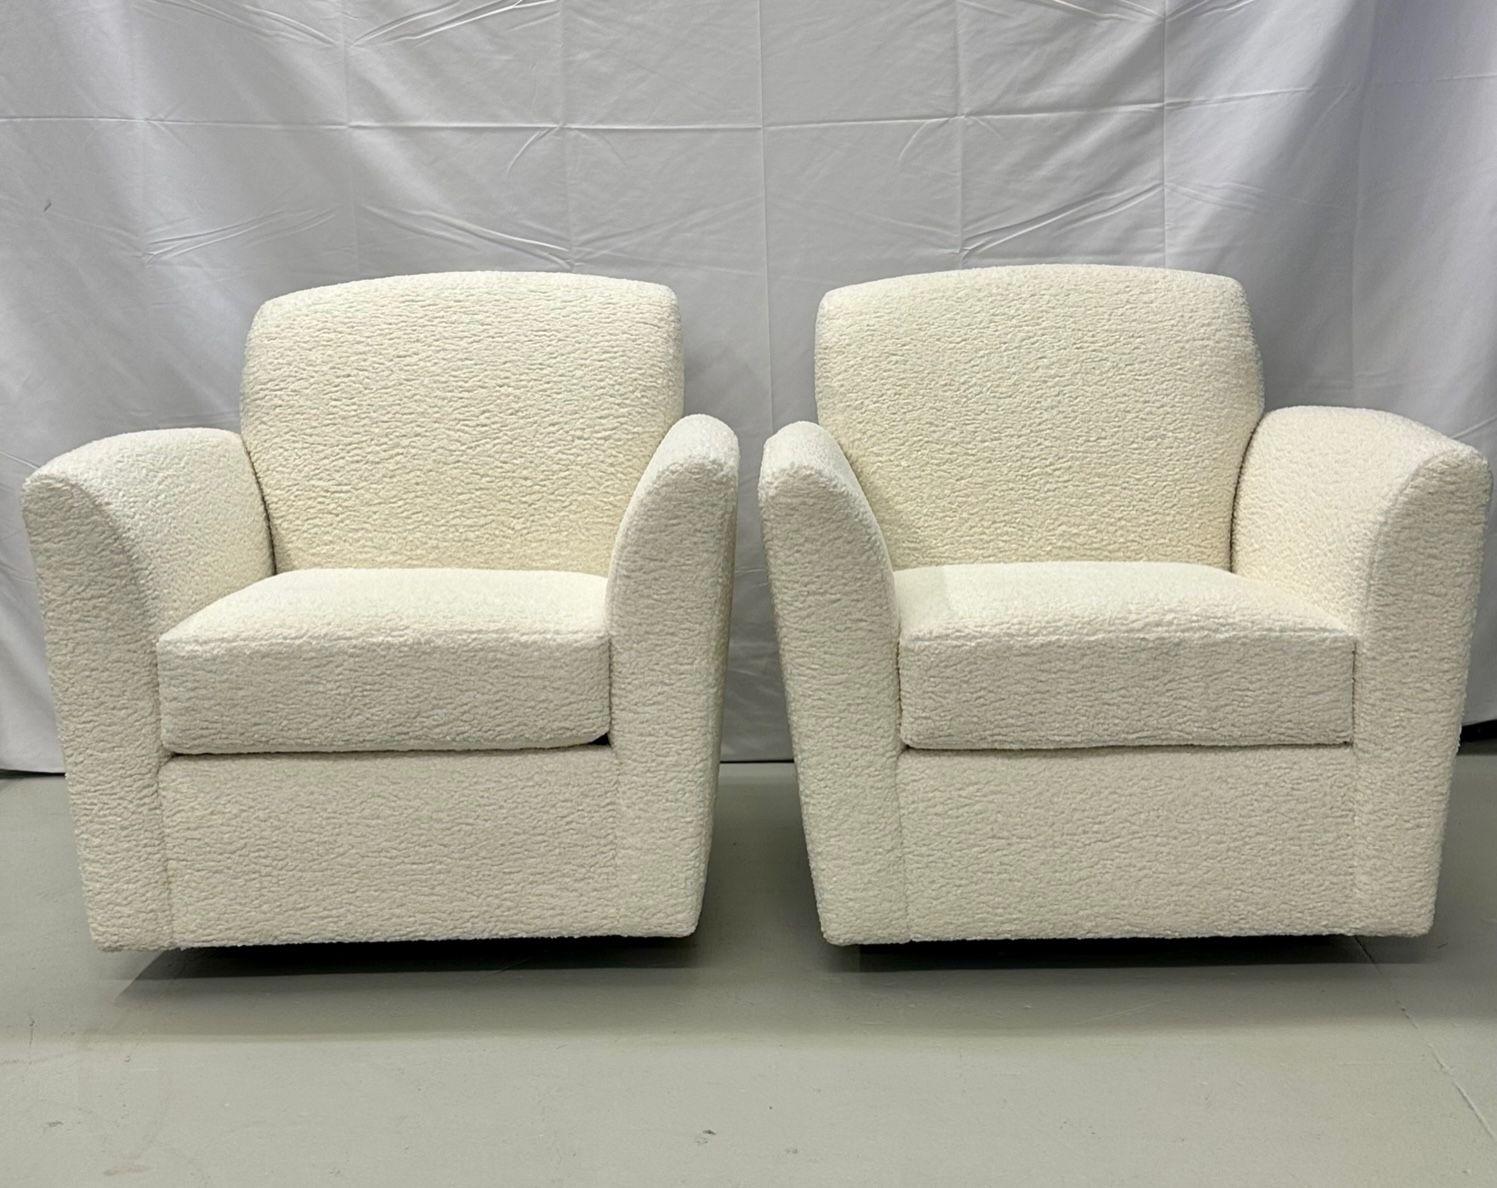 Pair of Mid-Century Modern Square White Boucle Rocking Lounge / Swivel Chairs In Good Condition For Sale In Stamford, CT